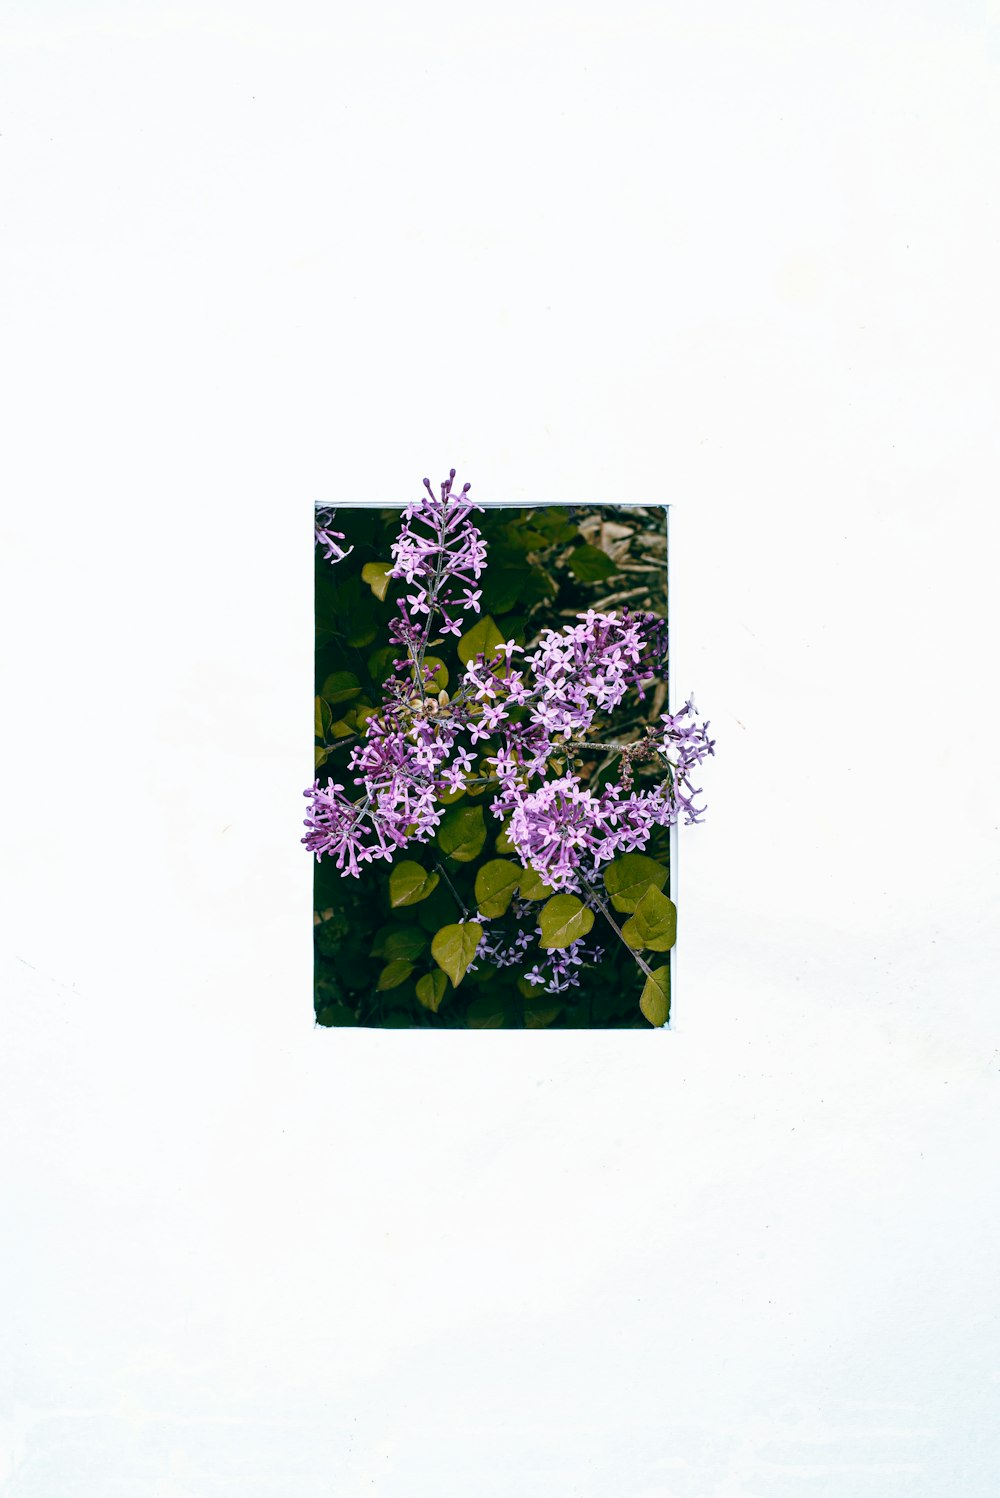 a picture of some purple flowers on a white background